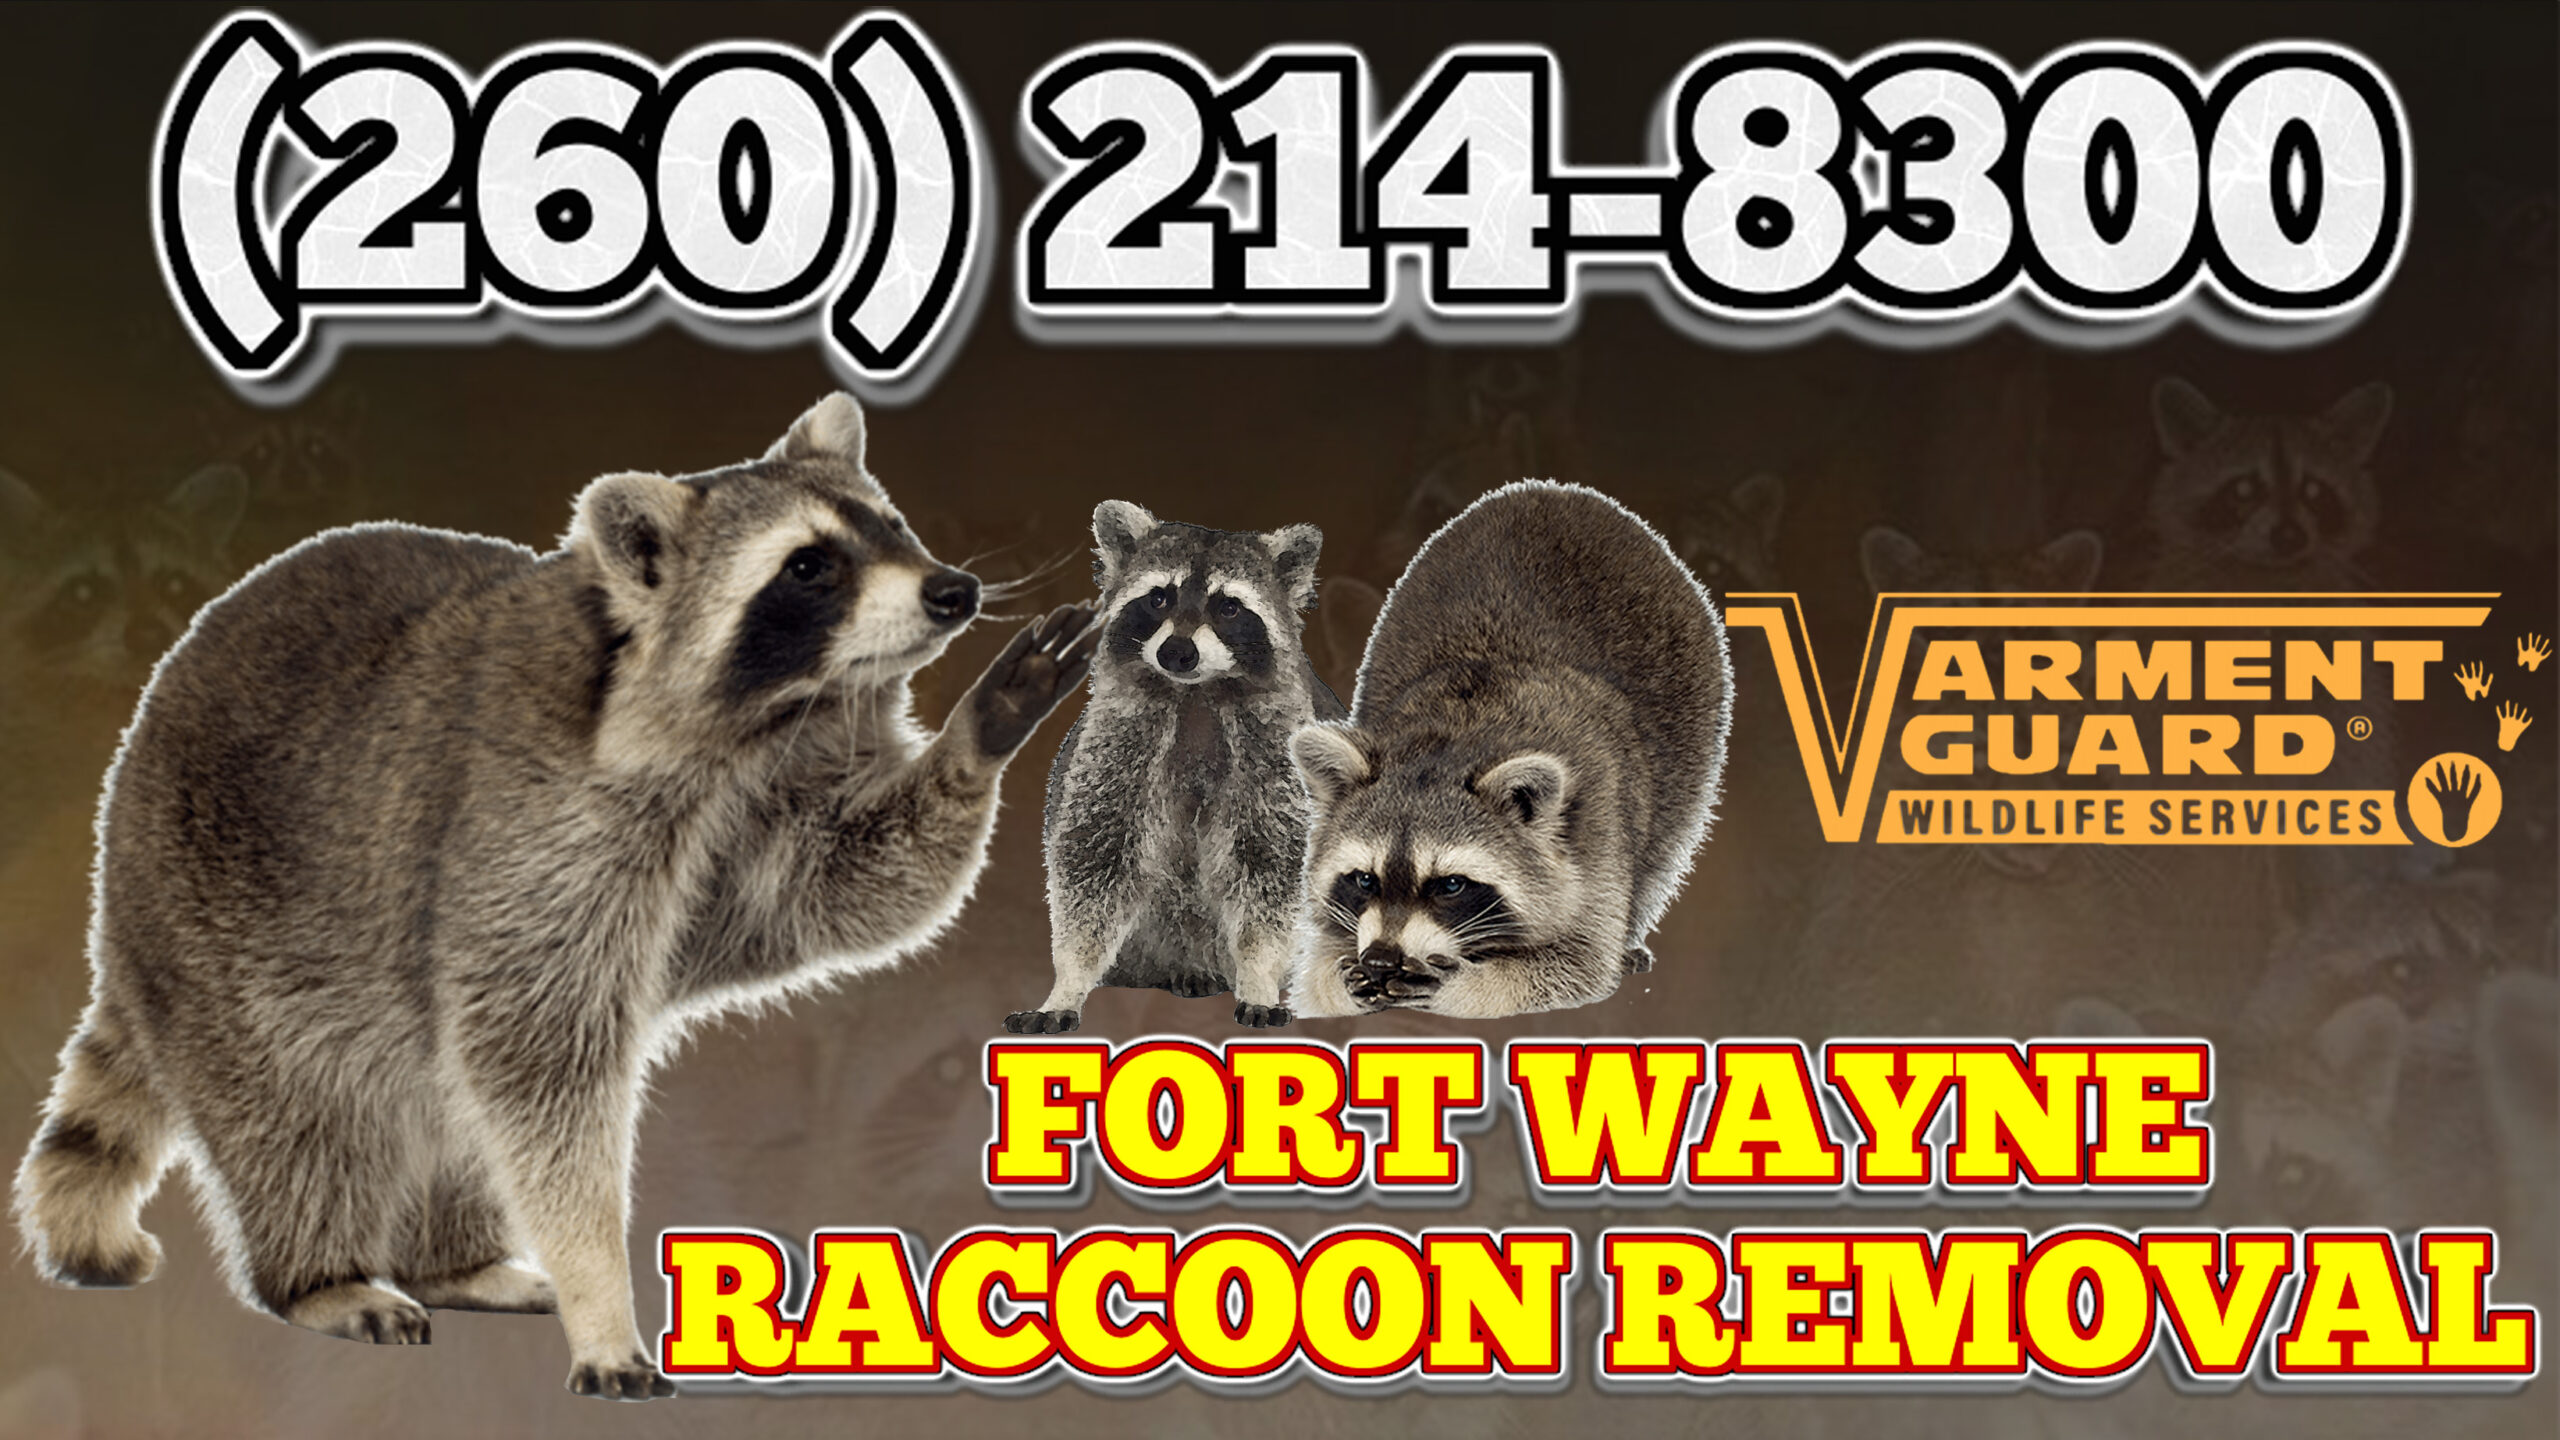 Kimmell raccoon removal near me